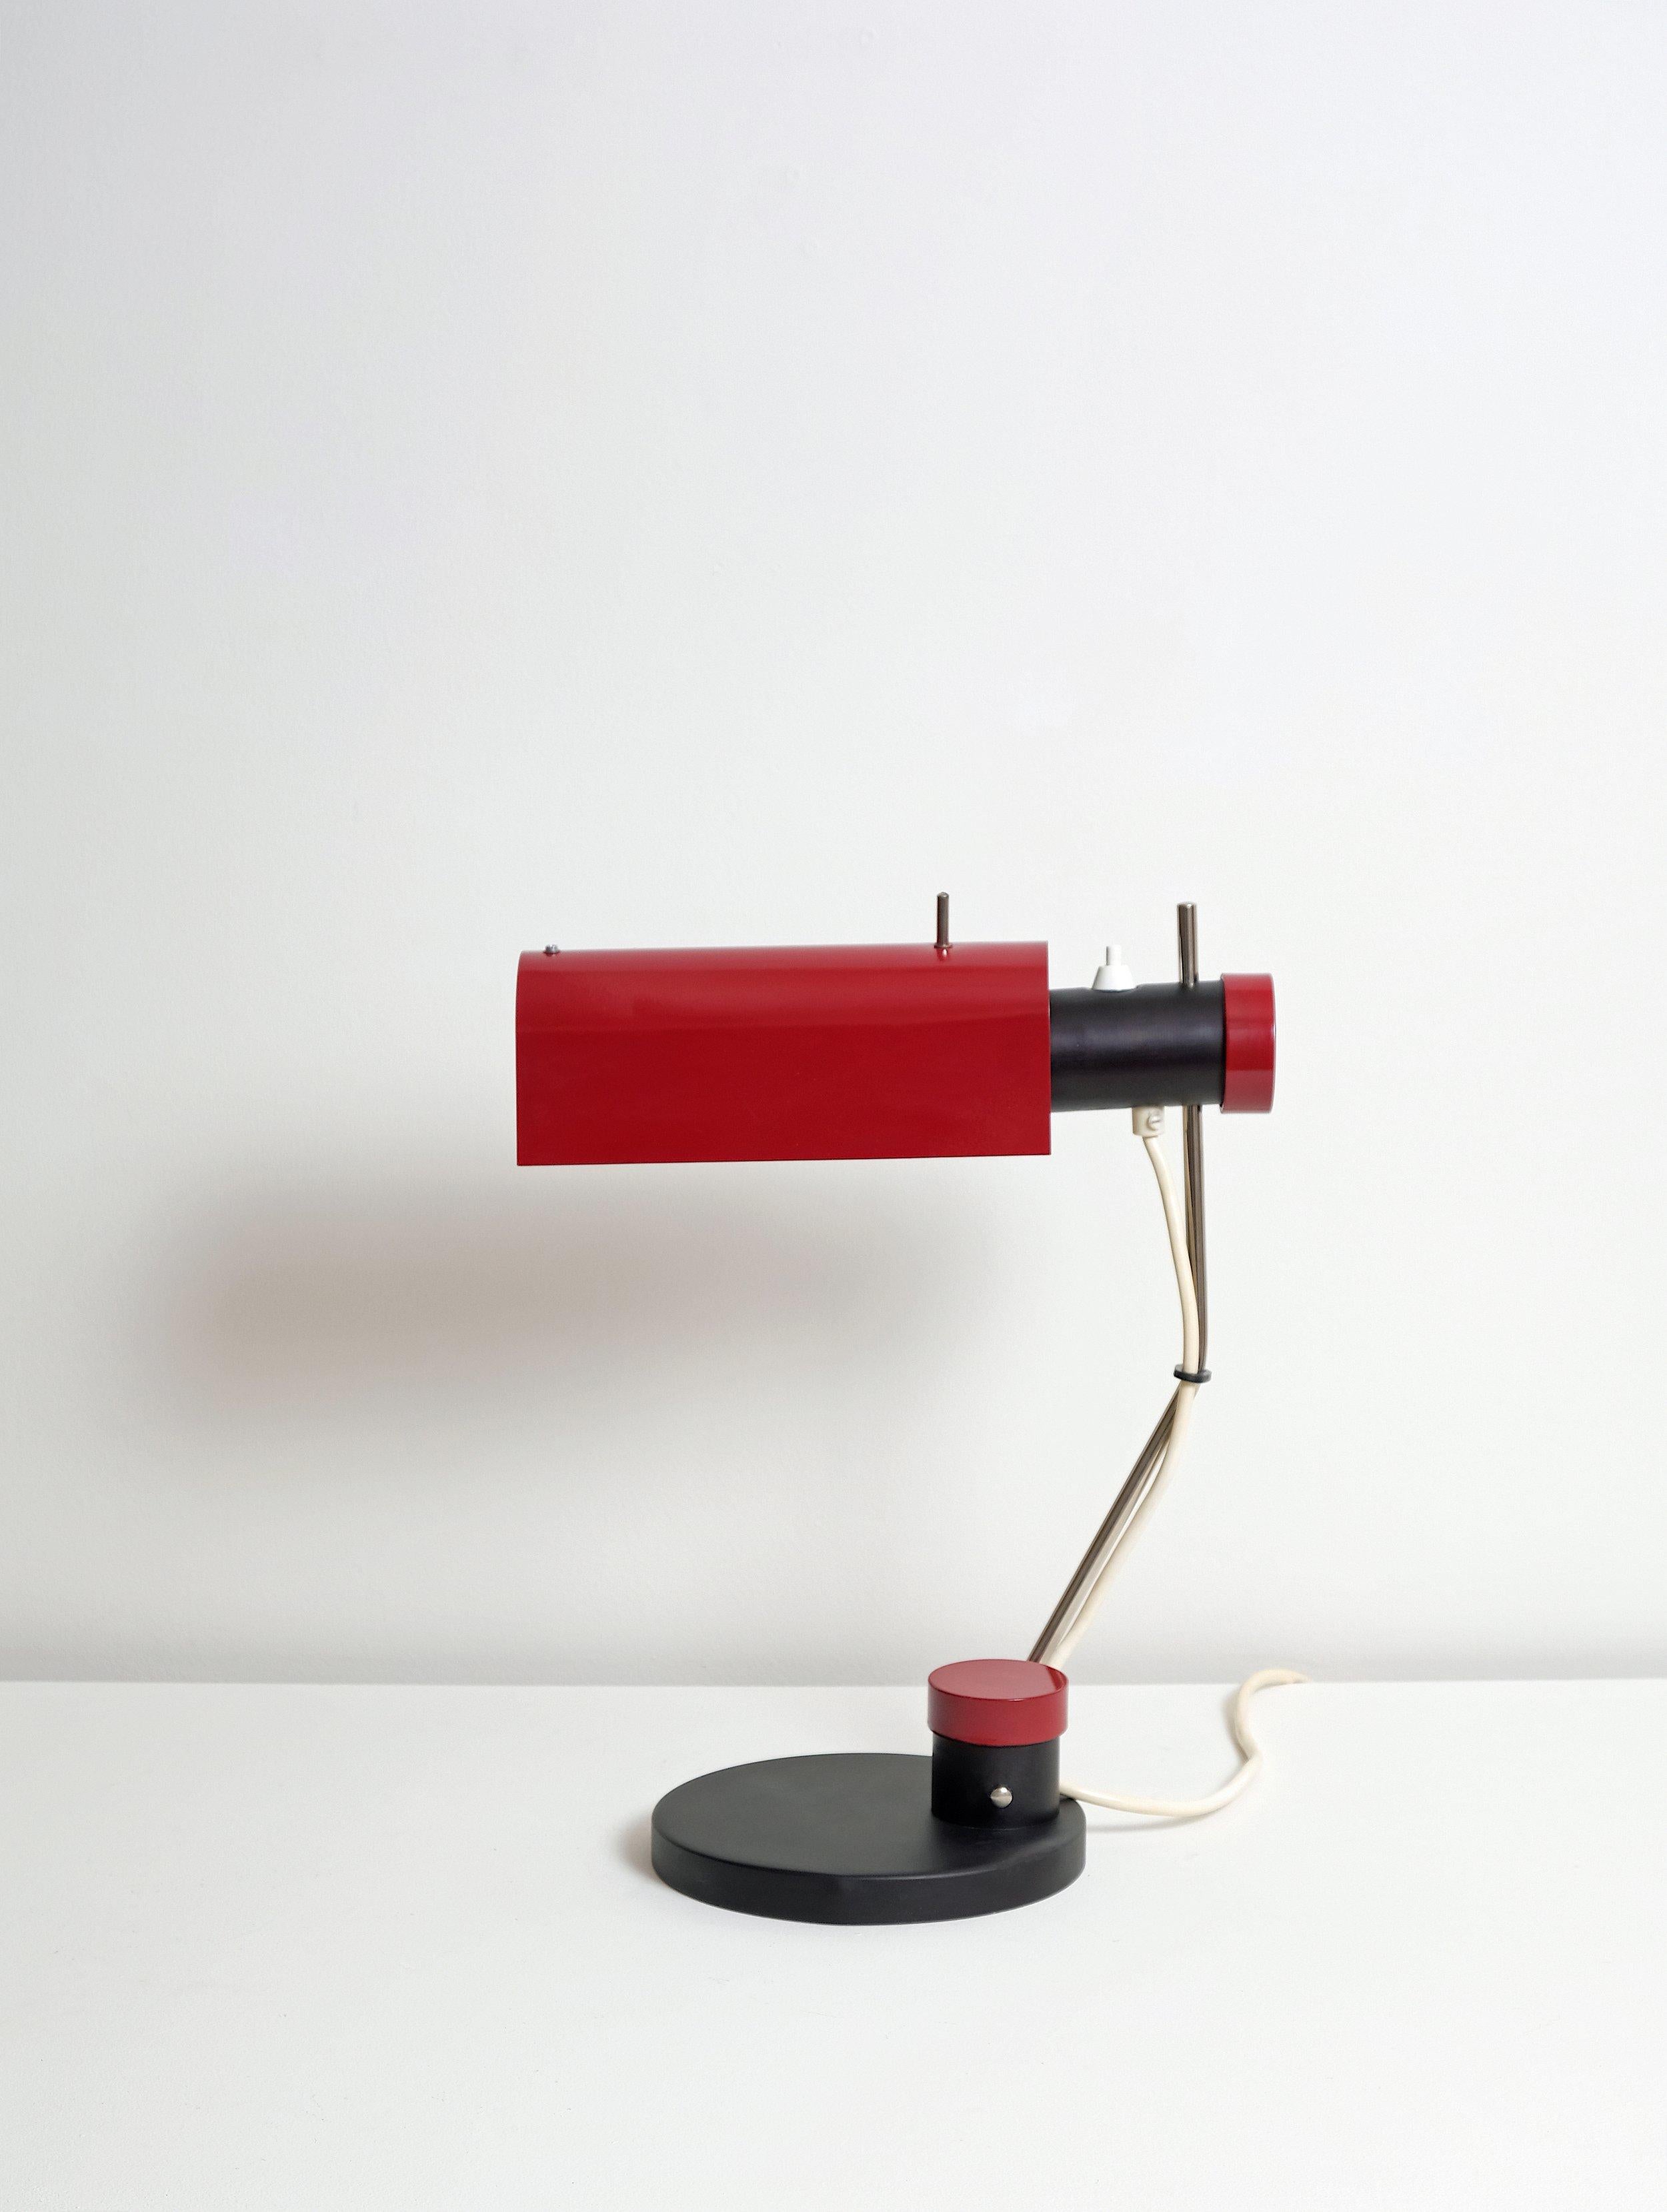 DDR desk lamp made by VEB Metalldrücker in East. Lacquered aluminium shade, polished steel fittings, lacquered bakelite knobs, lacquered steel base. 40-60 watts E-26 Edison medium base incandescent bulb recommended or higher if LED/CFL.
Original